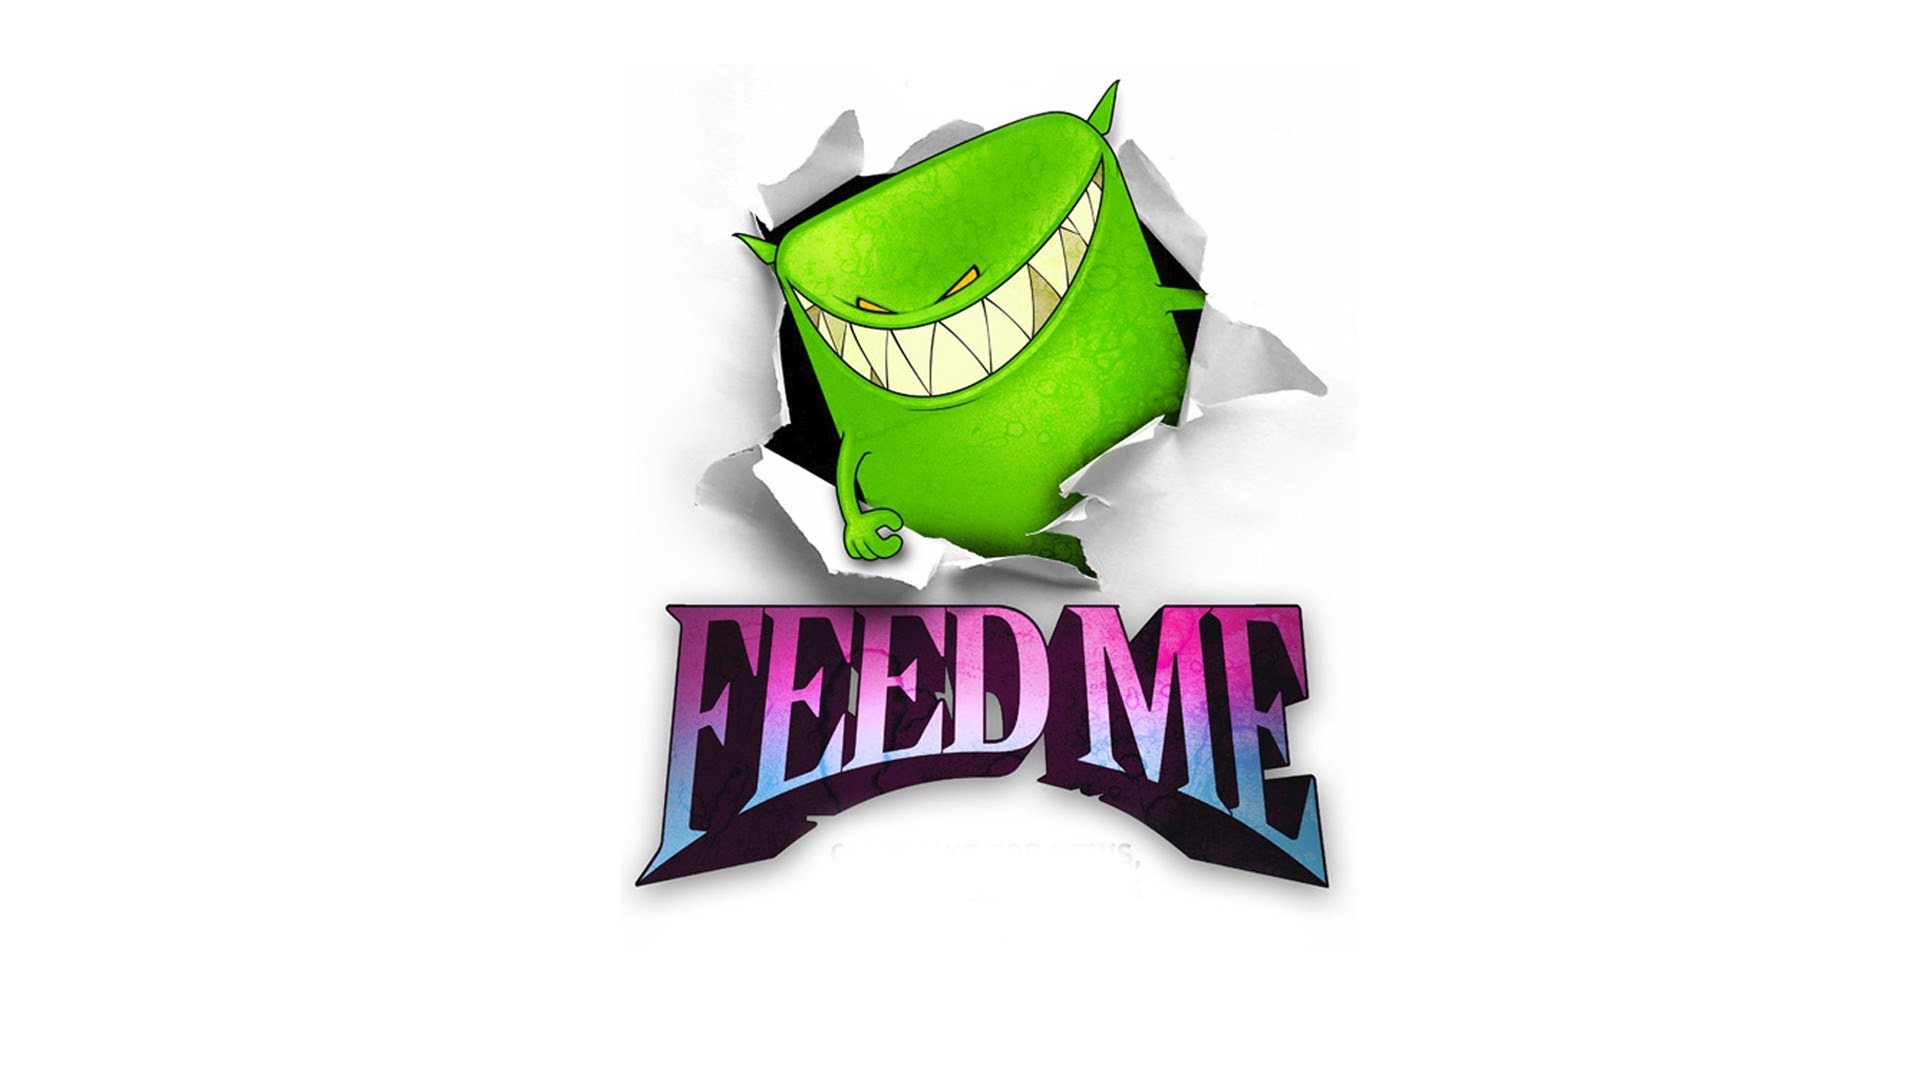 HD Quality Wallpaper | Collection: Music, 1920x1080 Feed Me